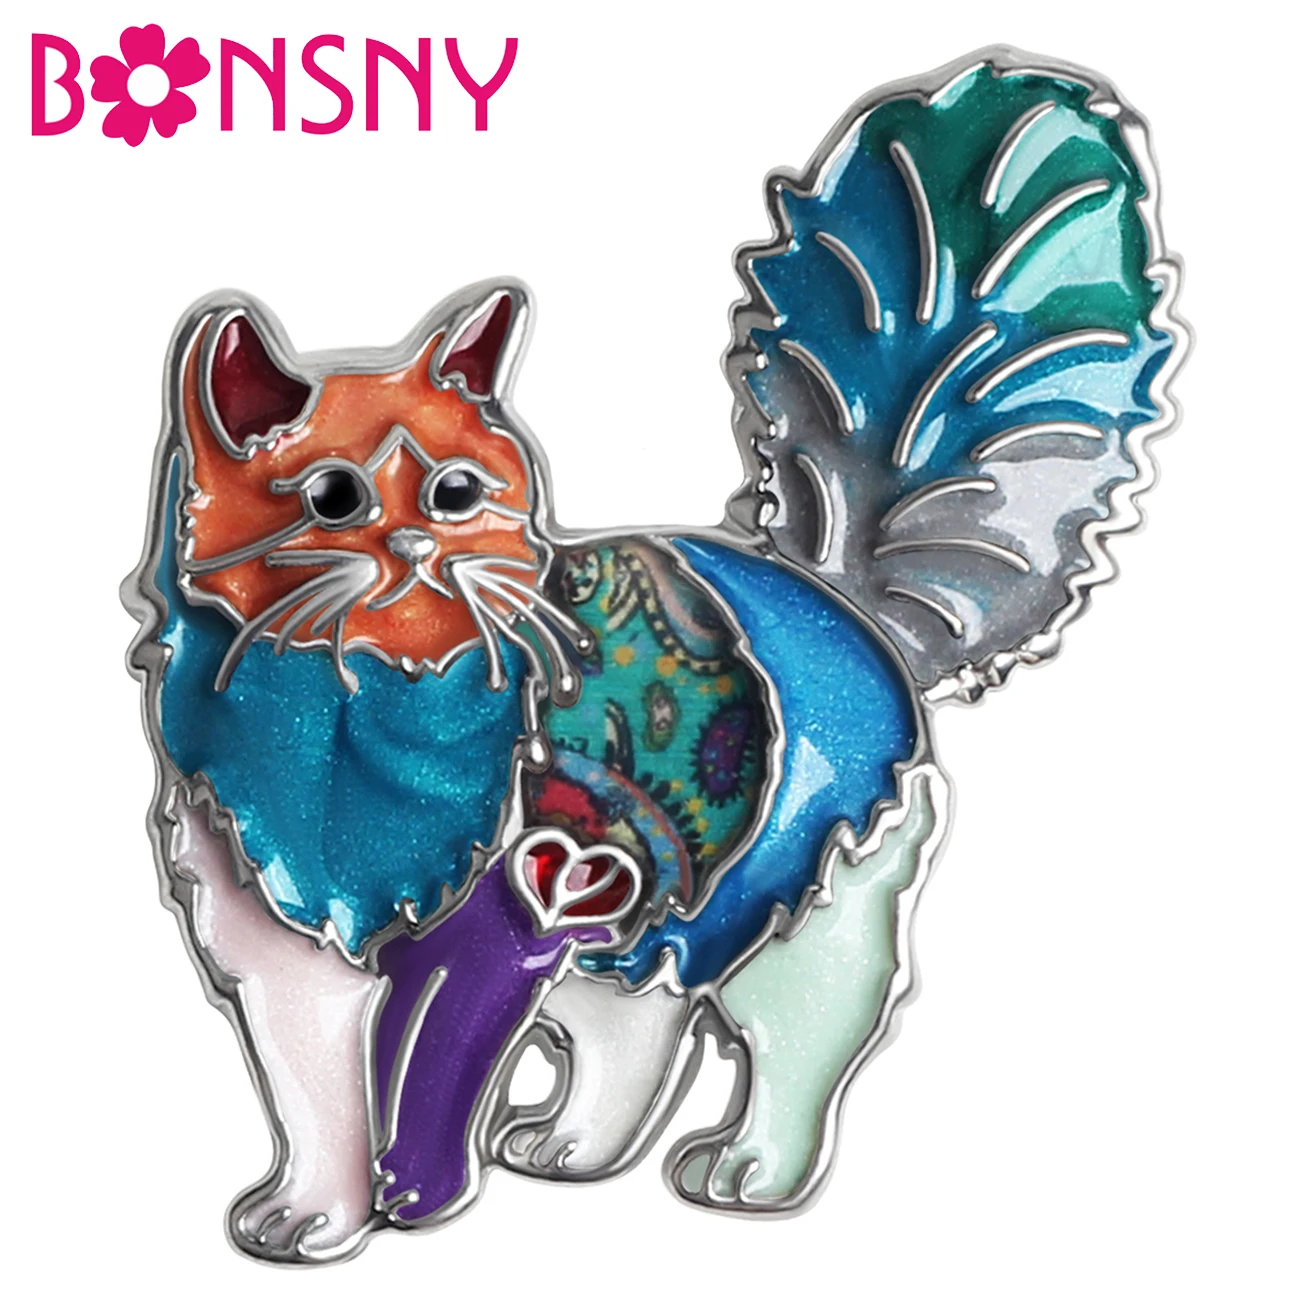 

Bonsny Enamel Alloy Metal Floral Sweet Fluffy Cat Kitten Brooches Pins Gifts Fashion Jewelry For Women Teens Girls Pets Lovers